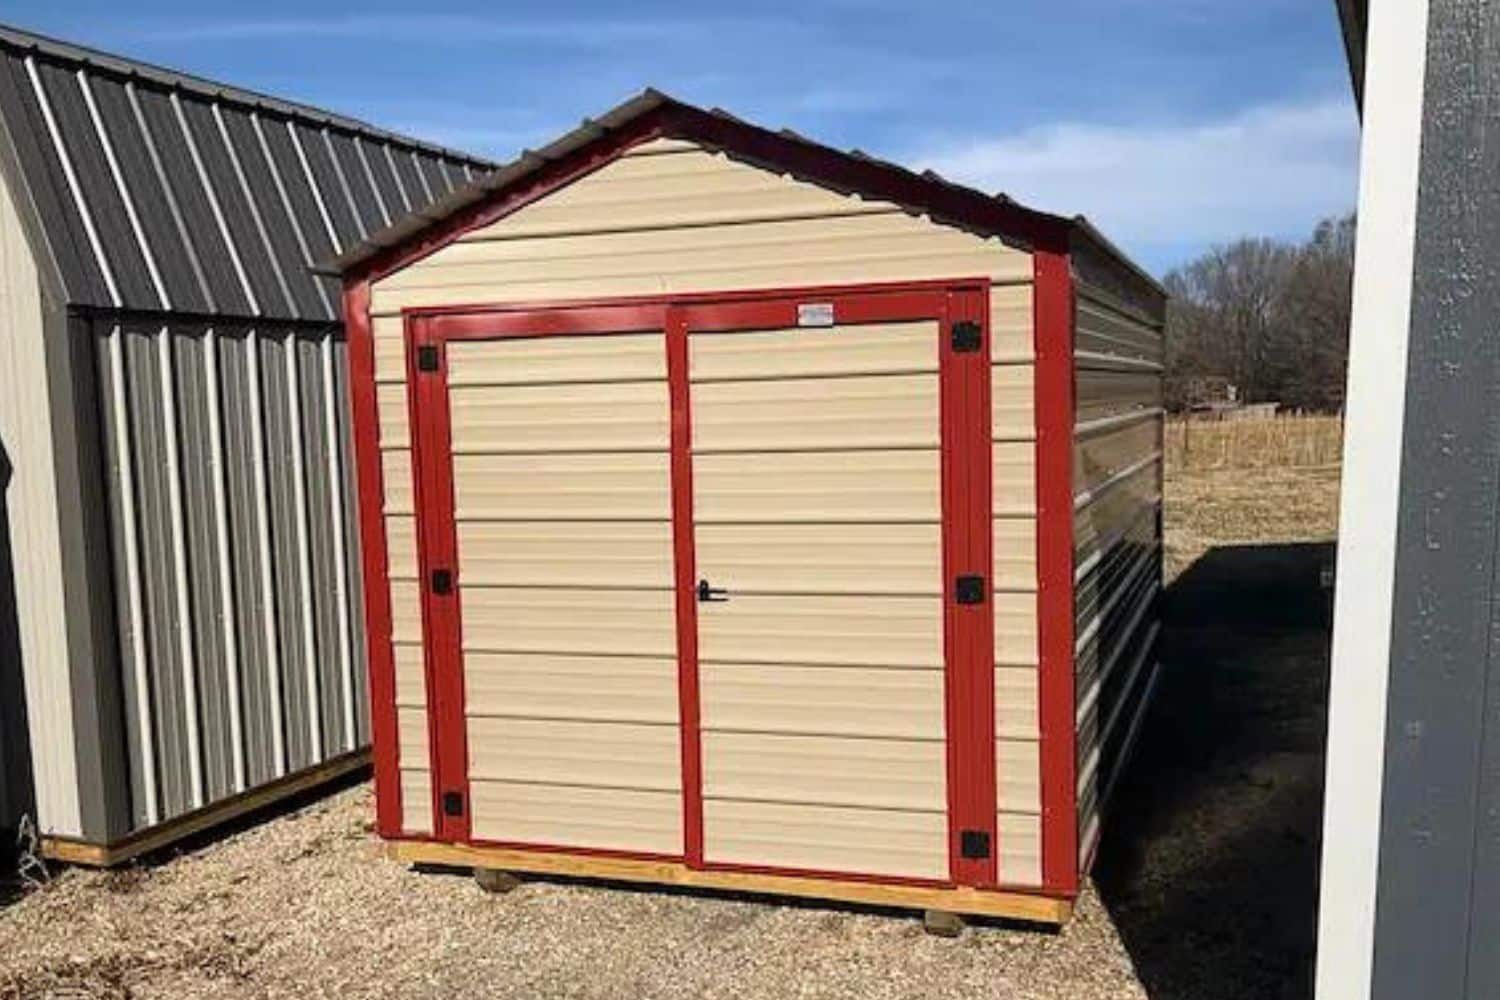 economy-metal-sheds-for-sale-in-missouri.jpg